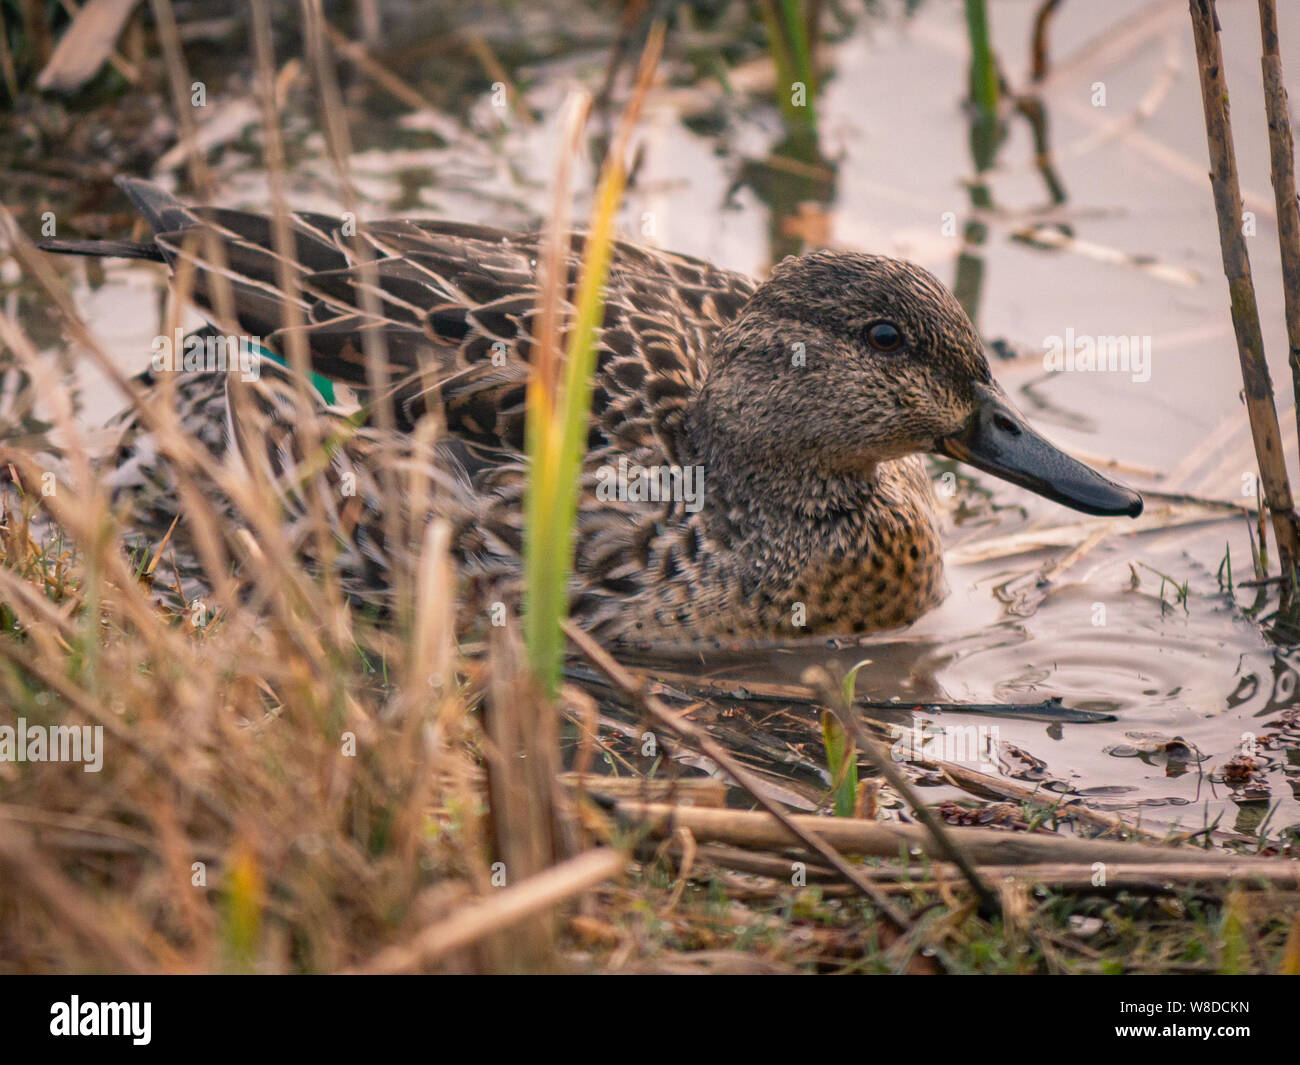 Animals found over a year in the italian regional natural reserve Tevere Farfa Stock Photo